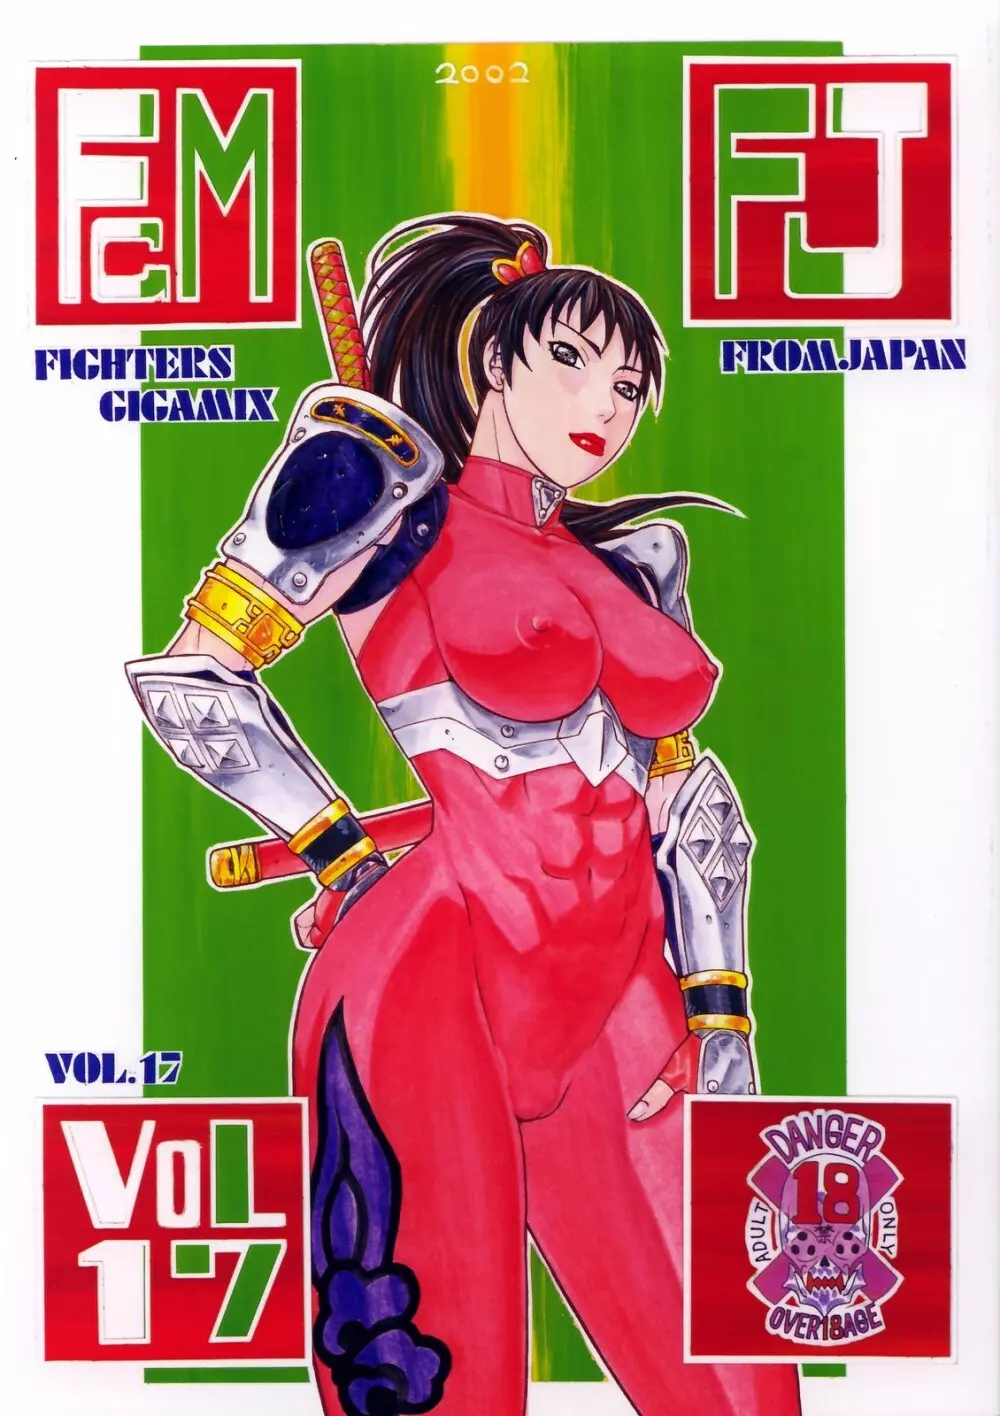 FIGHTERS GIGAMIX VOL.17